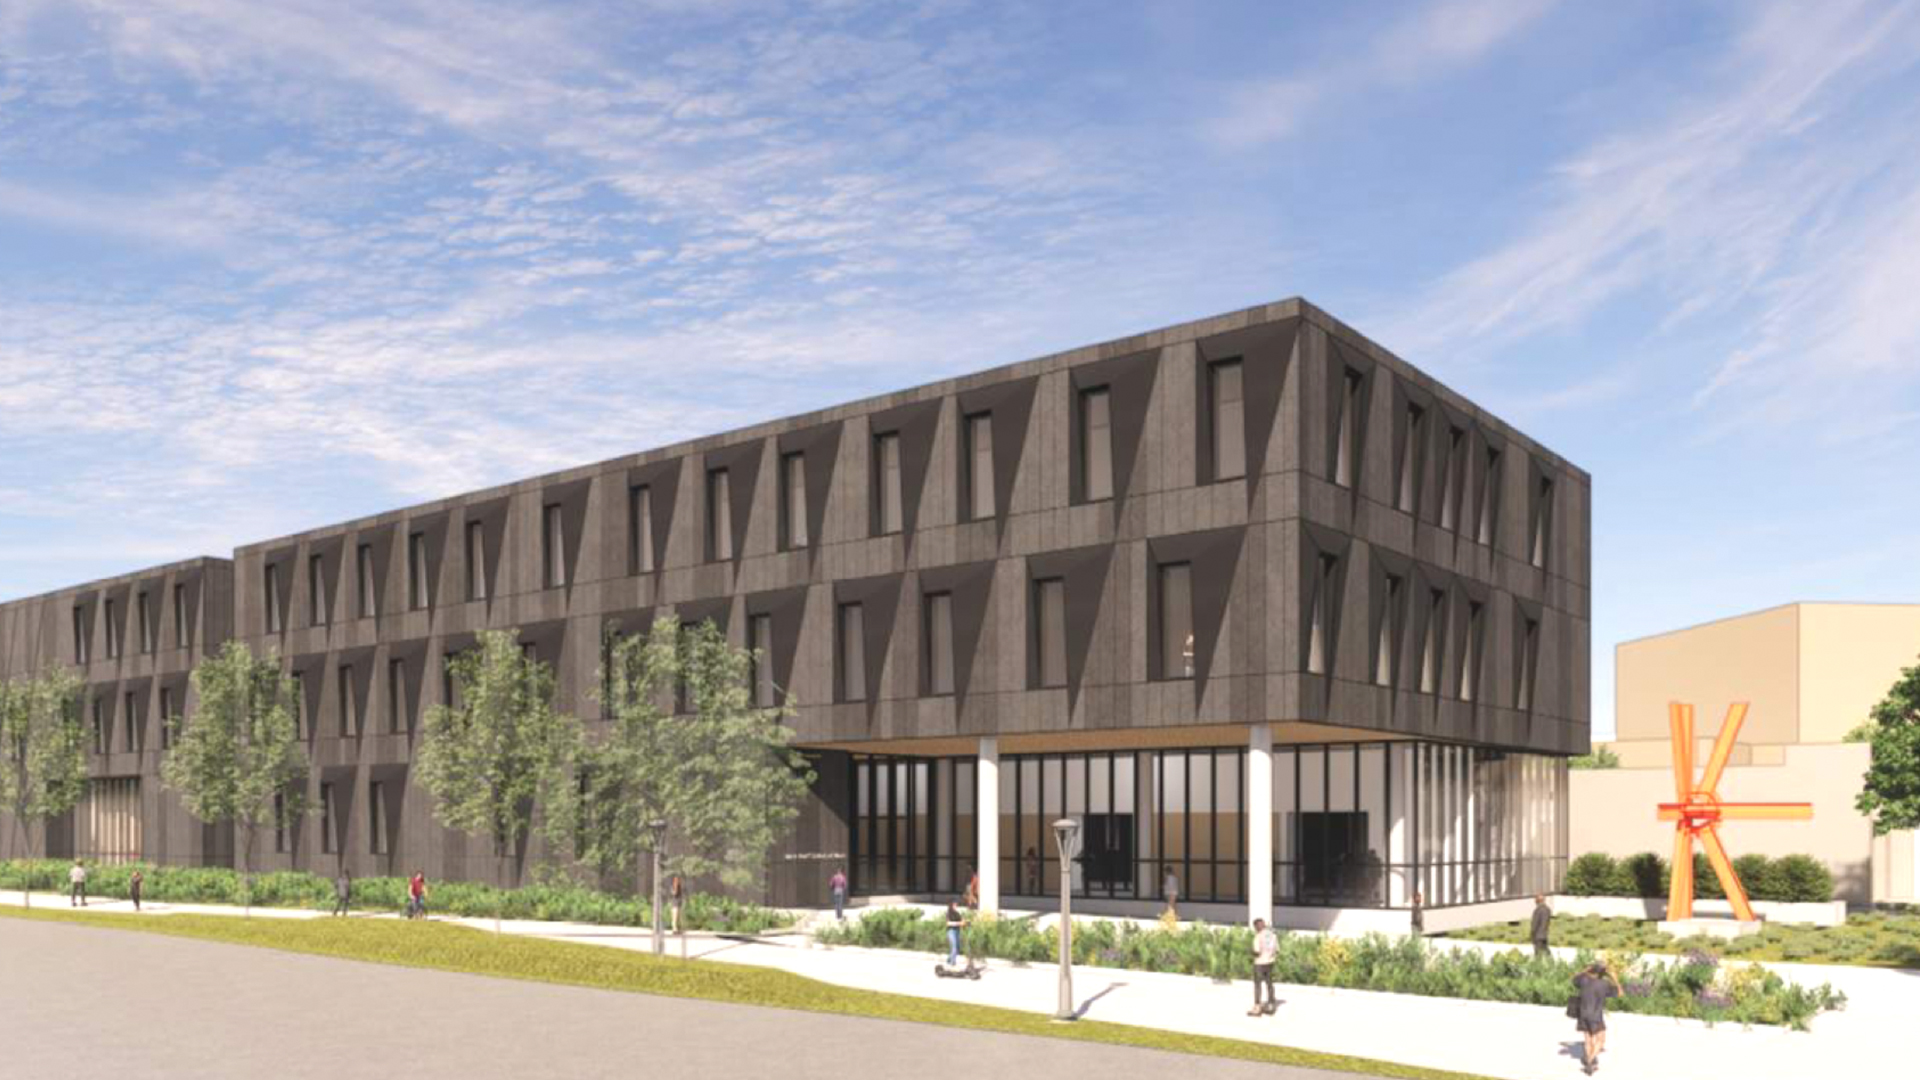 Architectural rendering of the new Westbrook Music Building estimated to be completed in Spring 2025